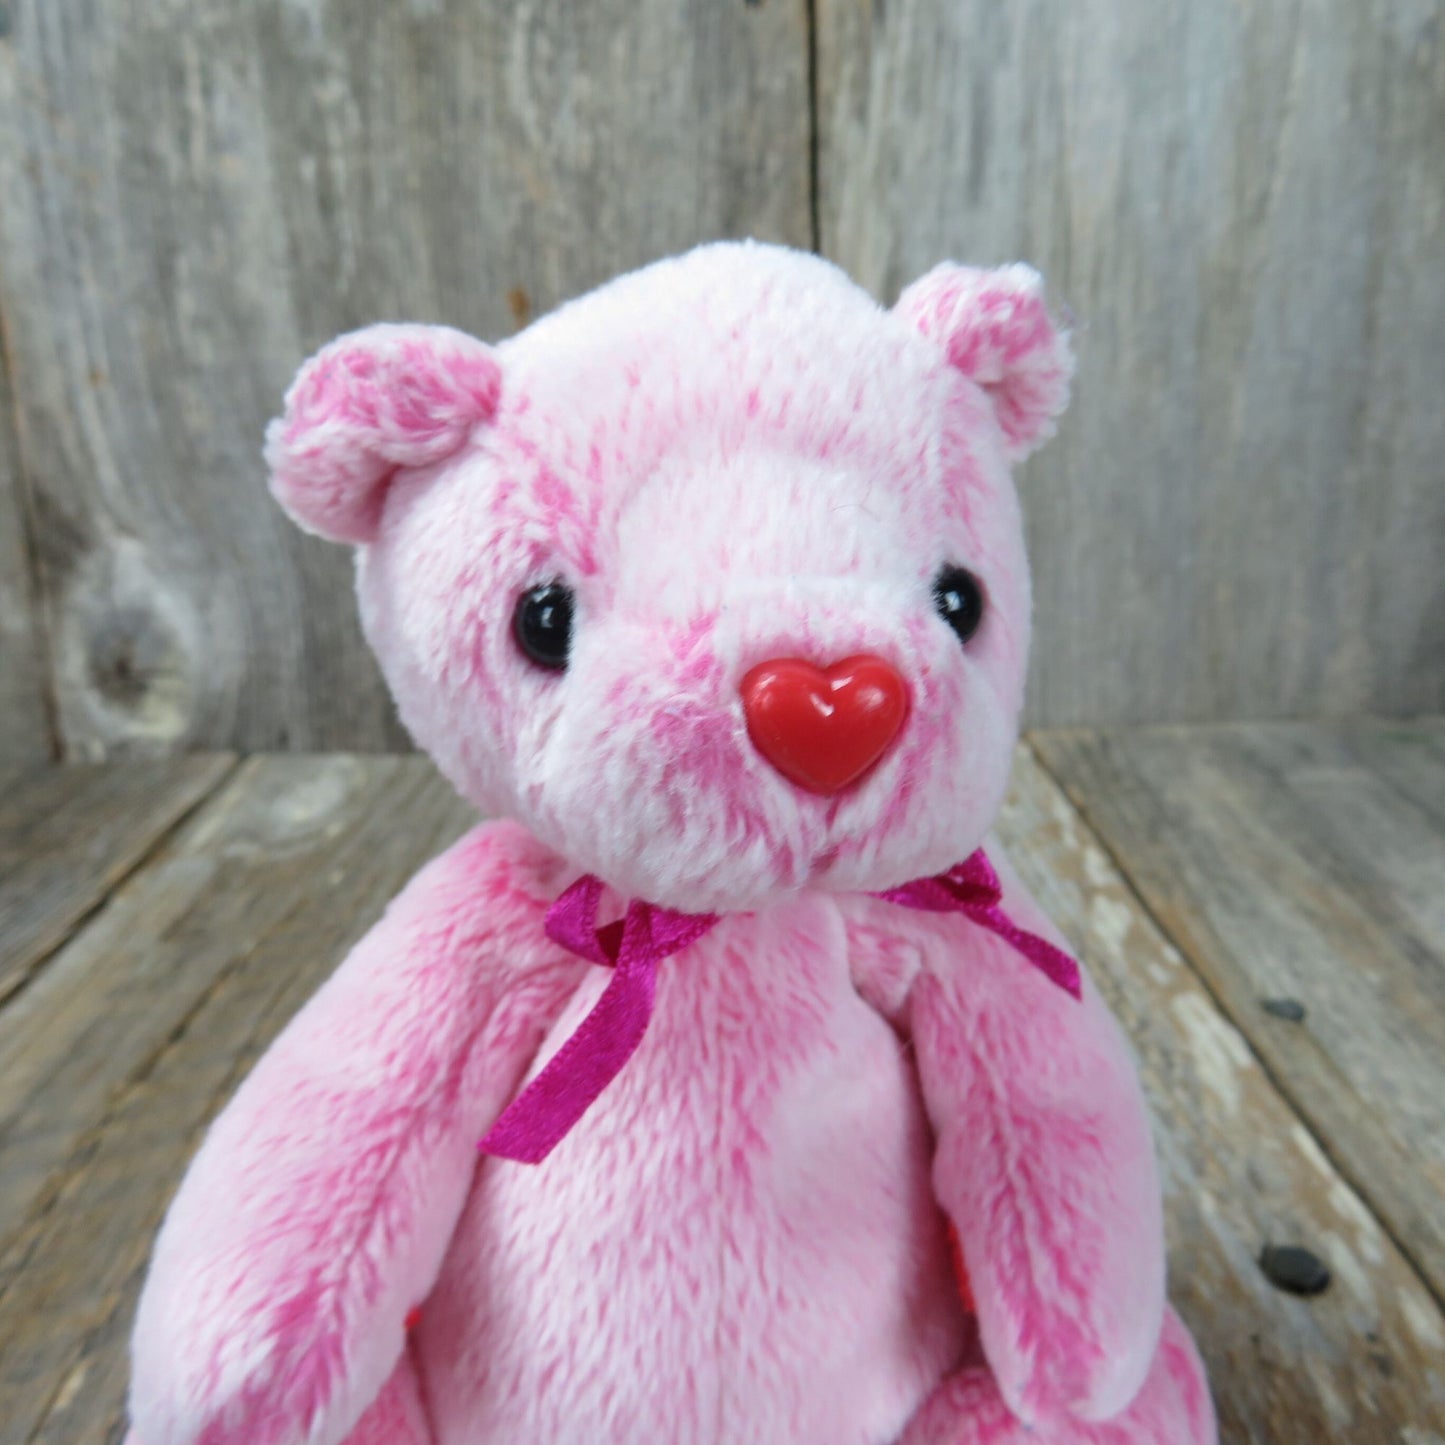 Pink Bear Plush Beanie Baby Romance Heart Nose Red Heart Paws Ty 2001 Stuffed Animal